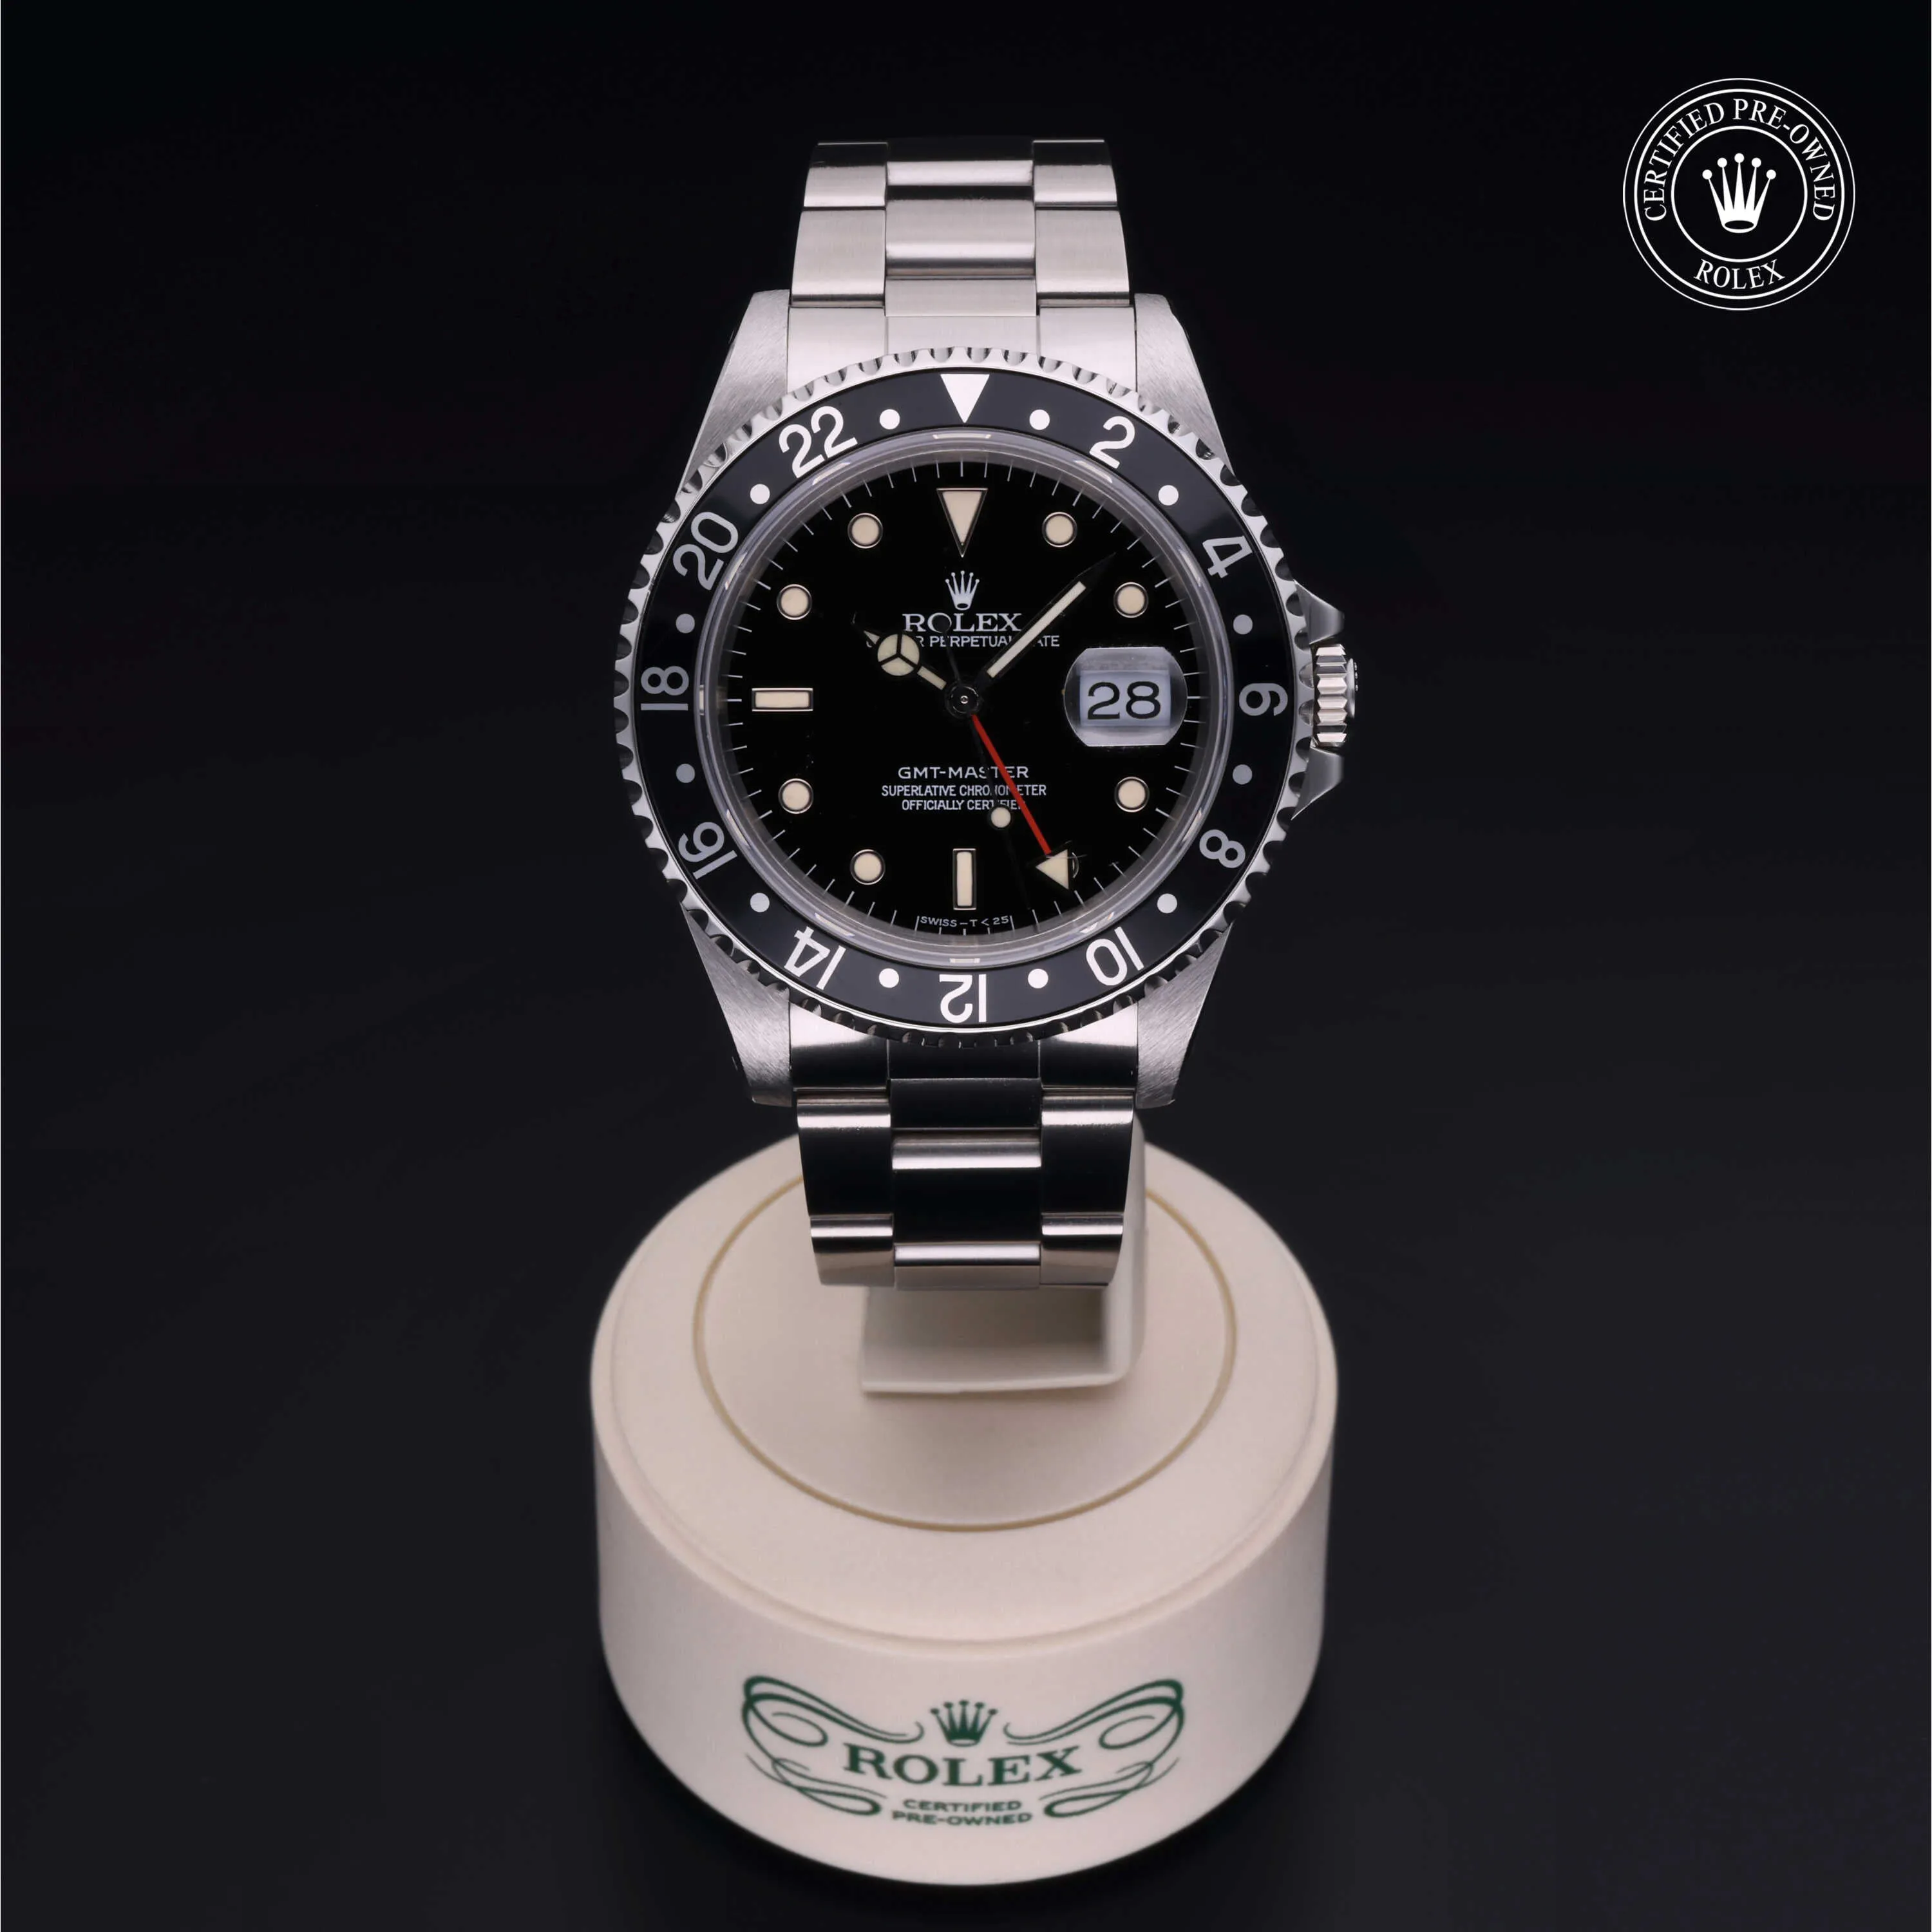 Rolex Oyster Perpetual, GMT Master 16700LN 40mm Stainless steel